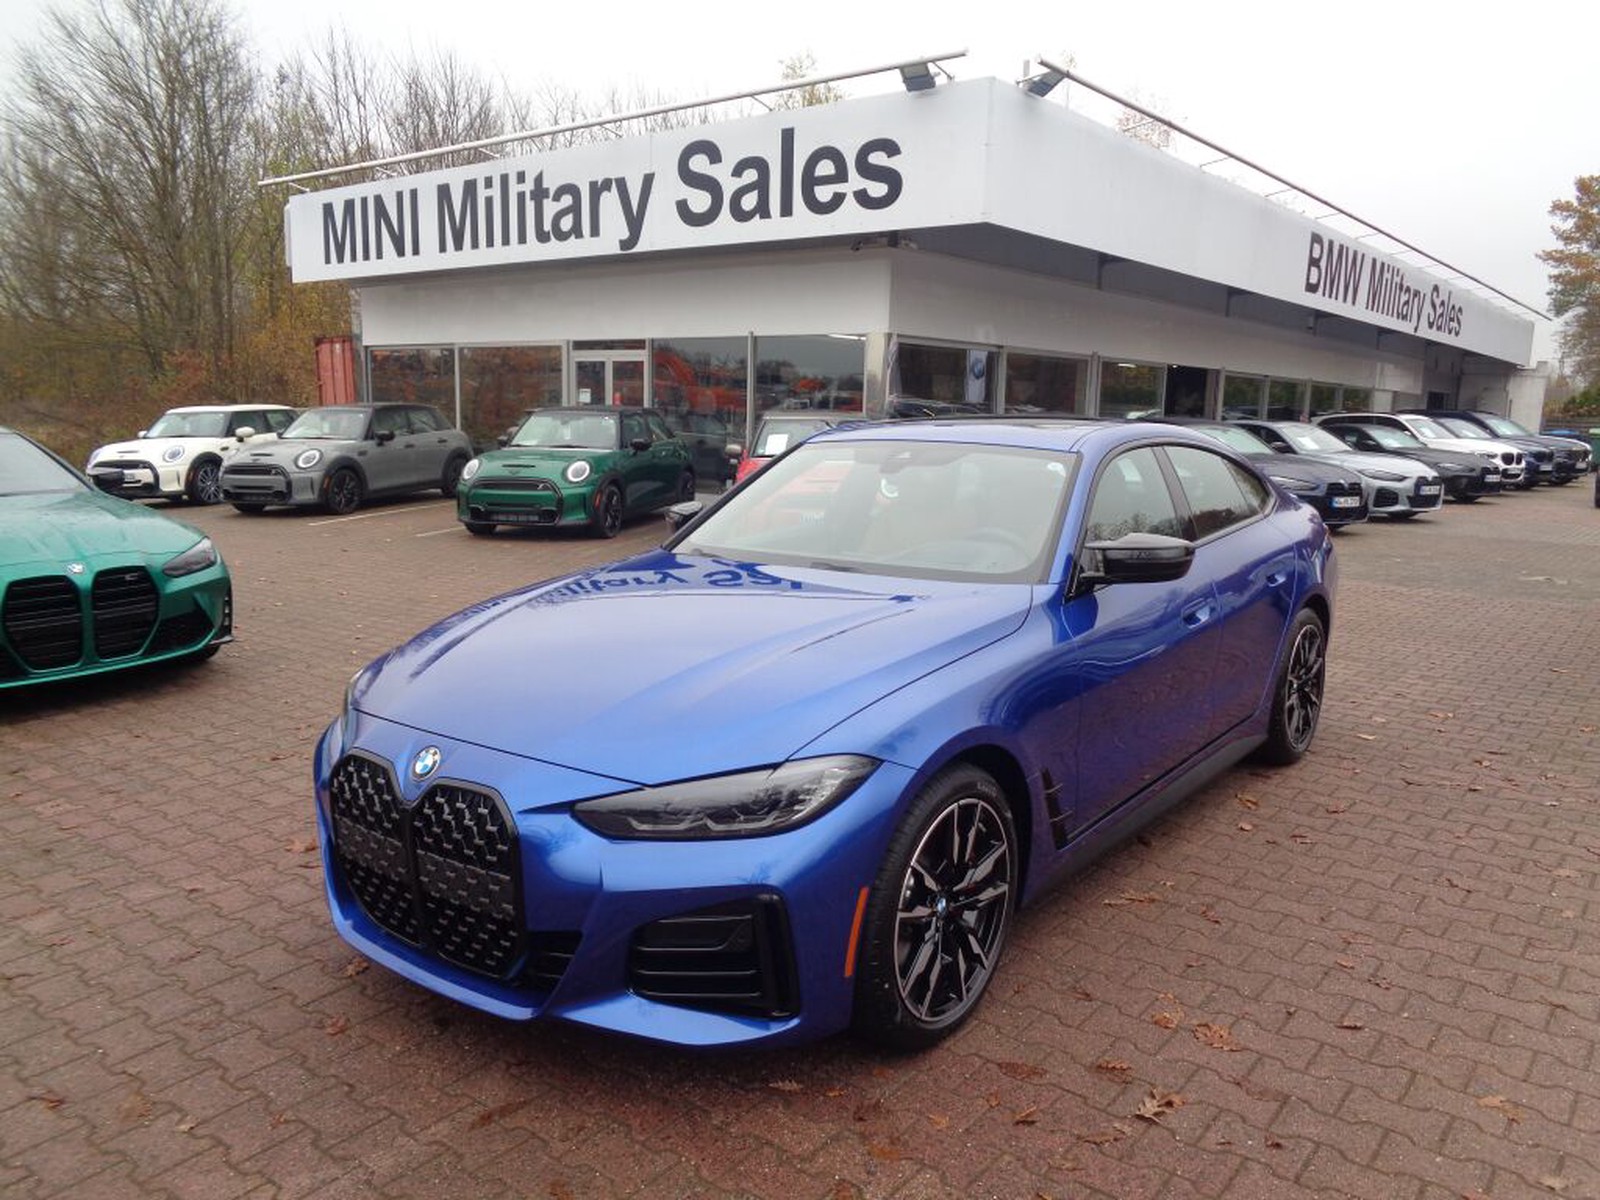 BMW M440i xDrive Gran Coupe Tax Free Military Sales in Kaiserslautern